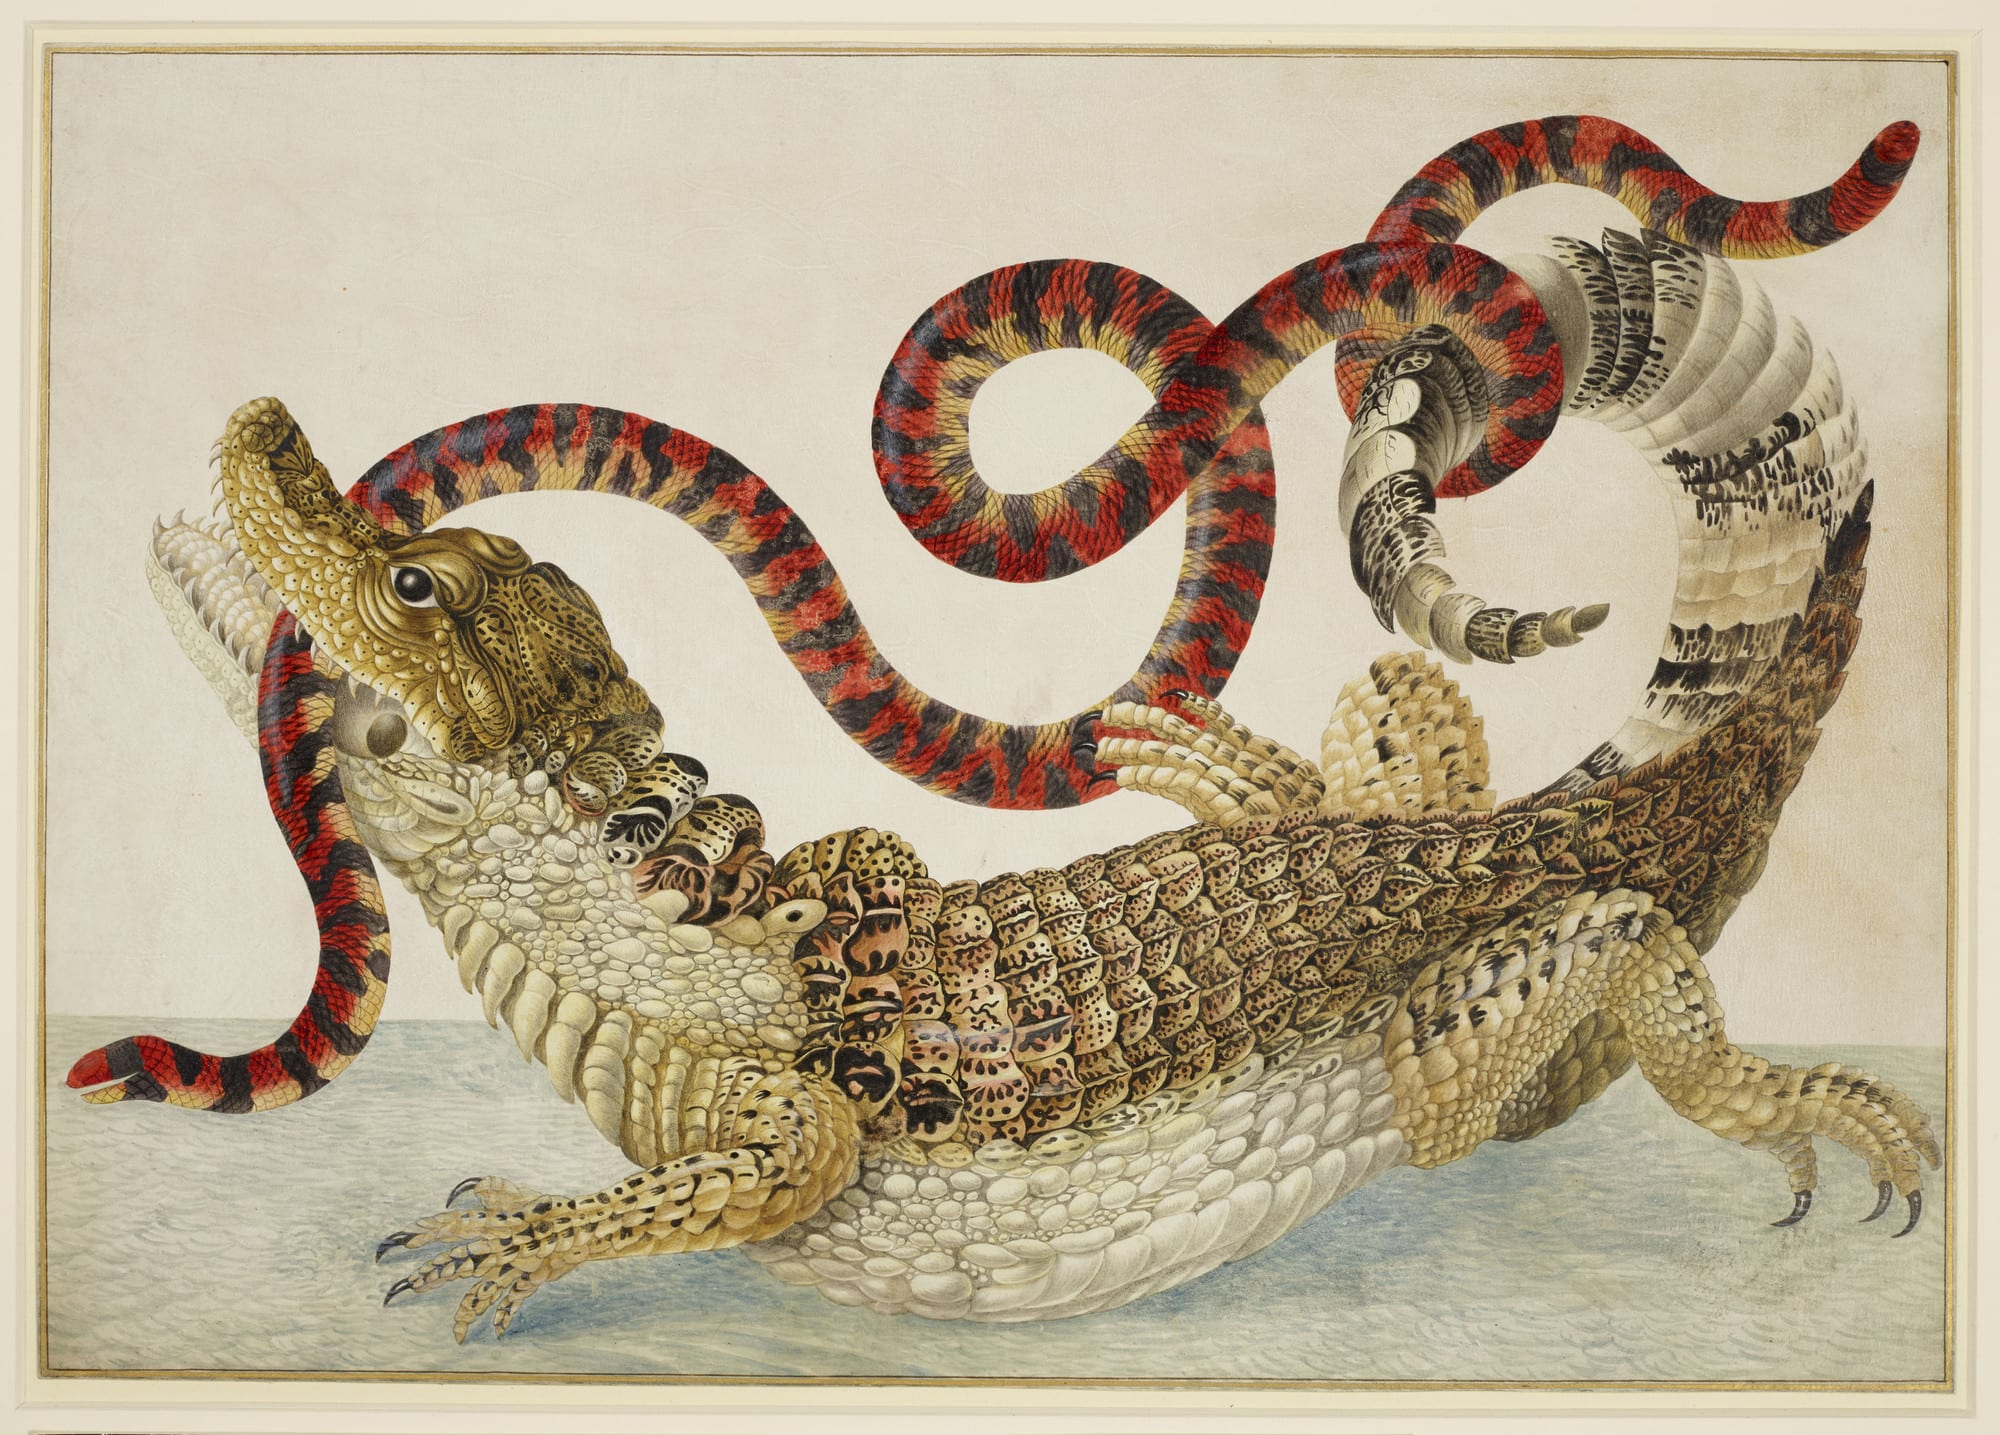 A caiman and snake in a scientific illustration